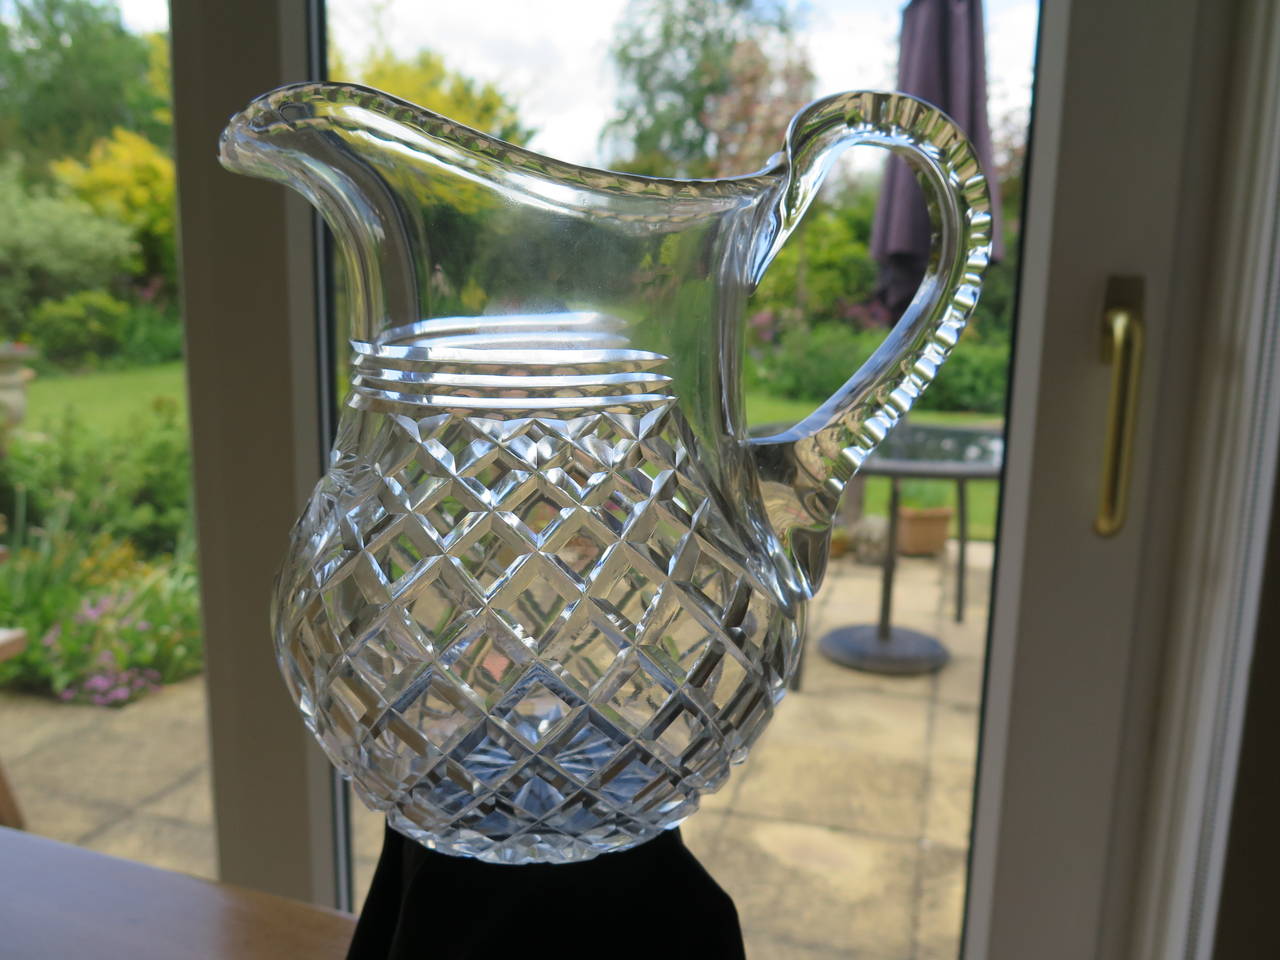 This is a high quality lead glass, crystal, water jug or pitcher dating to the late Georgian period of the early 19th century.

This jug is heavy (about 1.4 kg) and substantial holding well over two pints, with a nice light grey tone, typical of